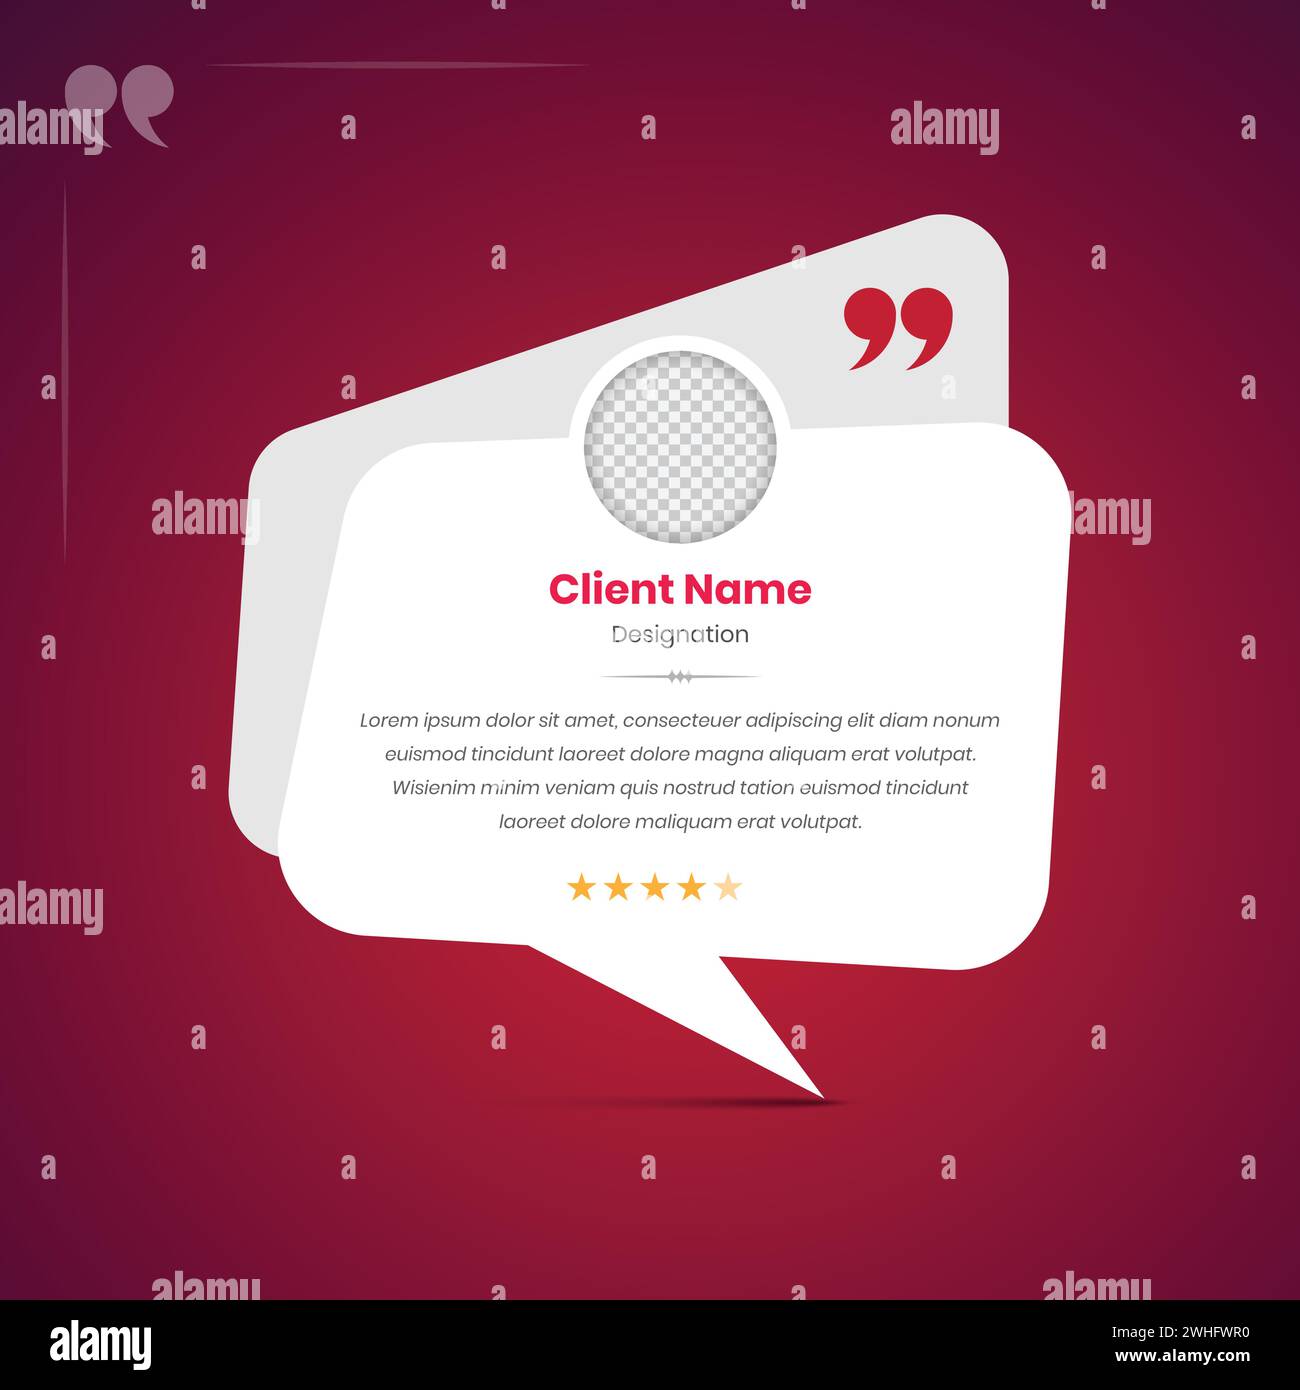 Client feedback and social media post testimonial template in simple layout Stock Vector